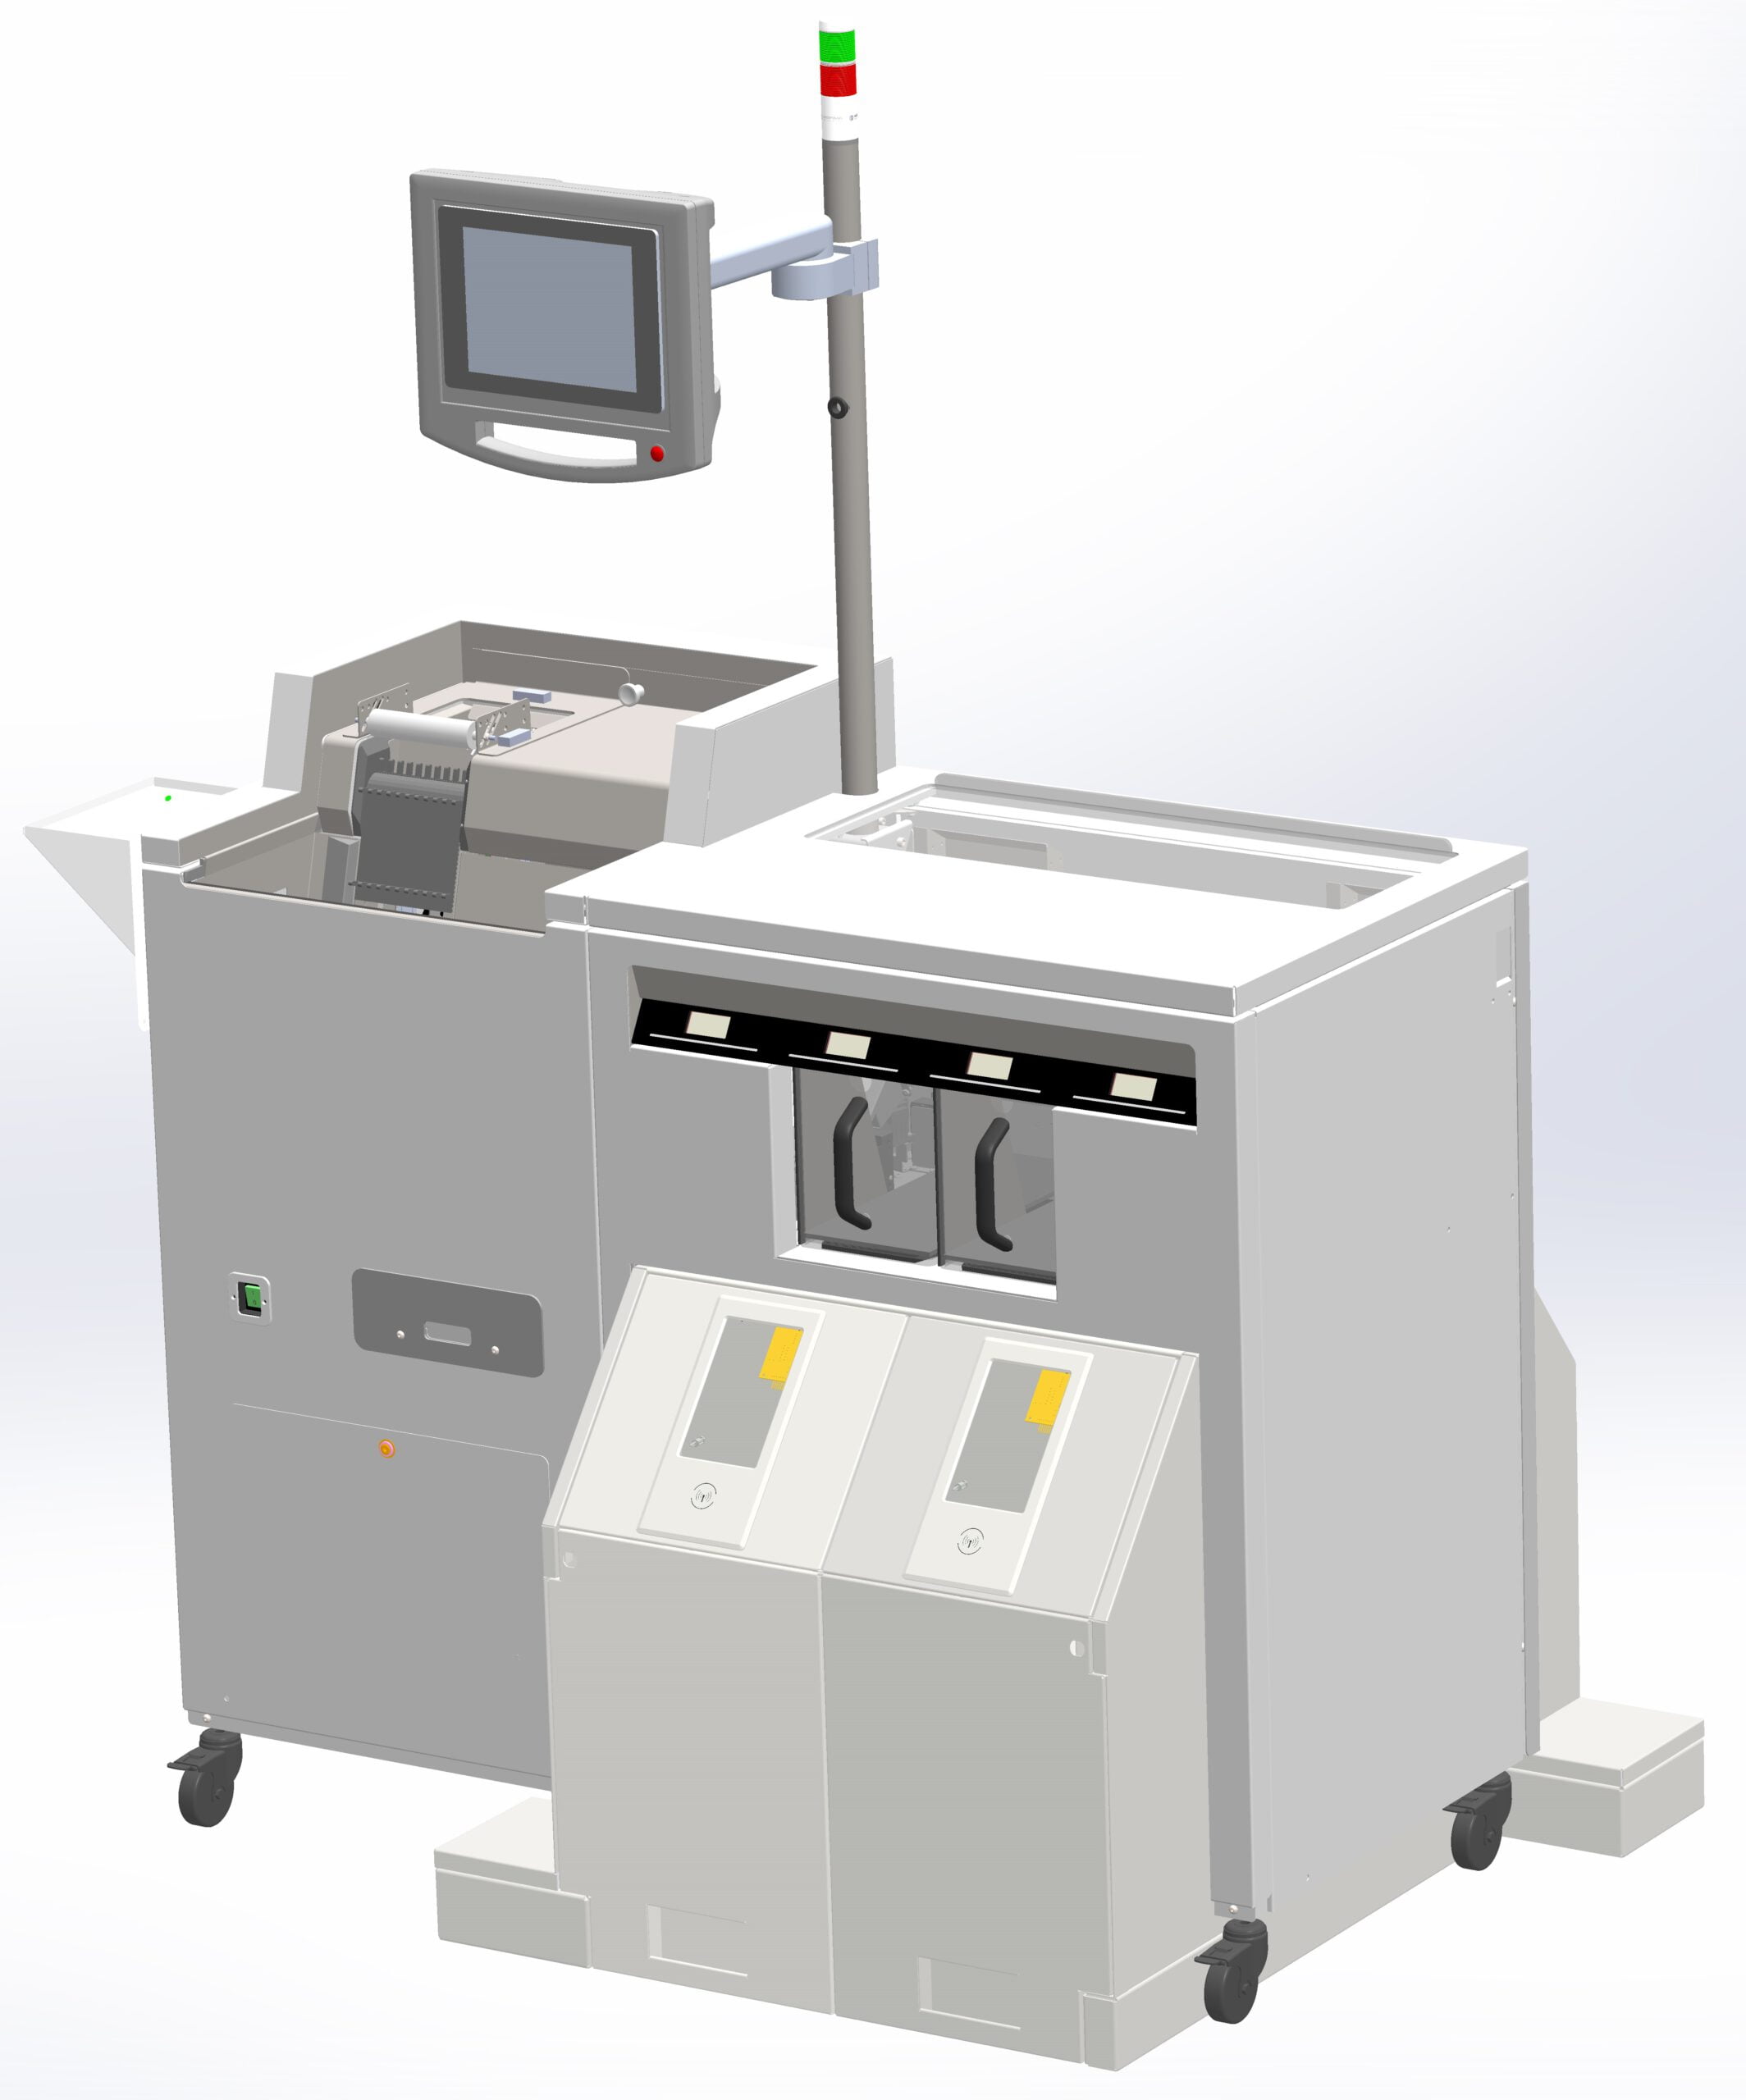 ALSR4 is an exclusive OEM development for Sumetzberger. It is tube sorter adapted for aditional sample transportation